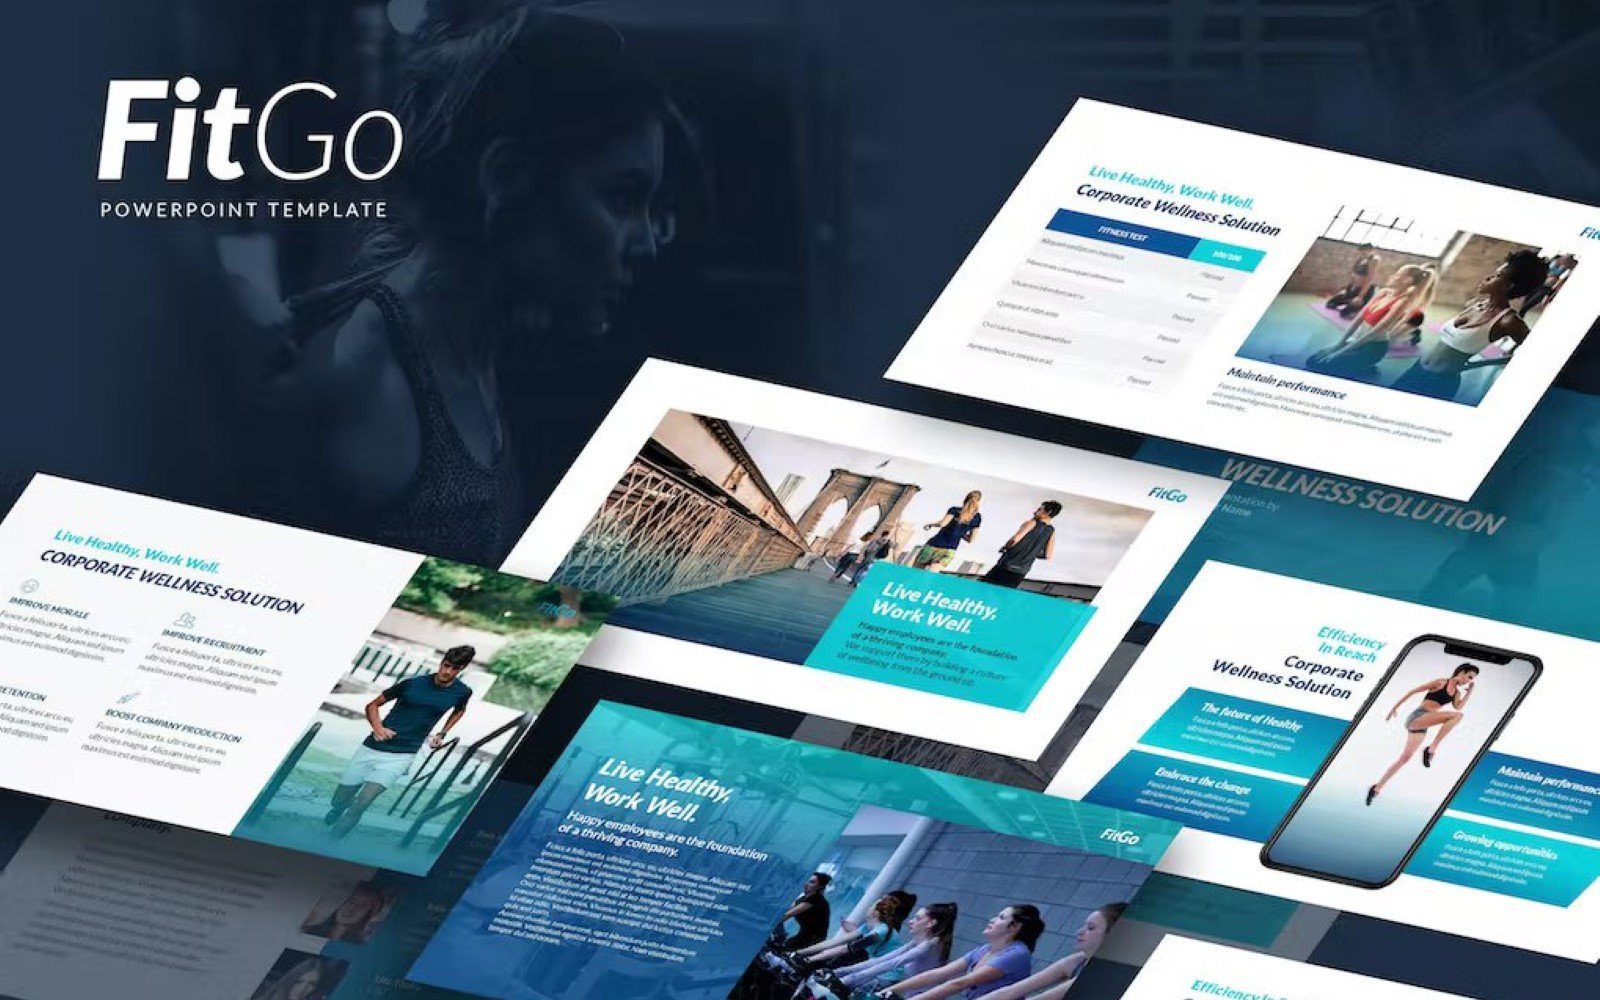 FitGo - Powerpoint Template